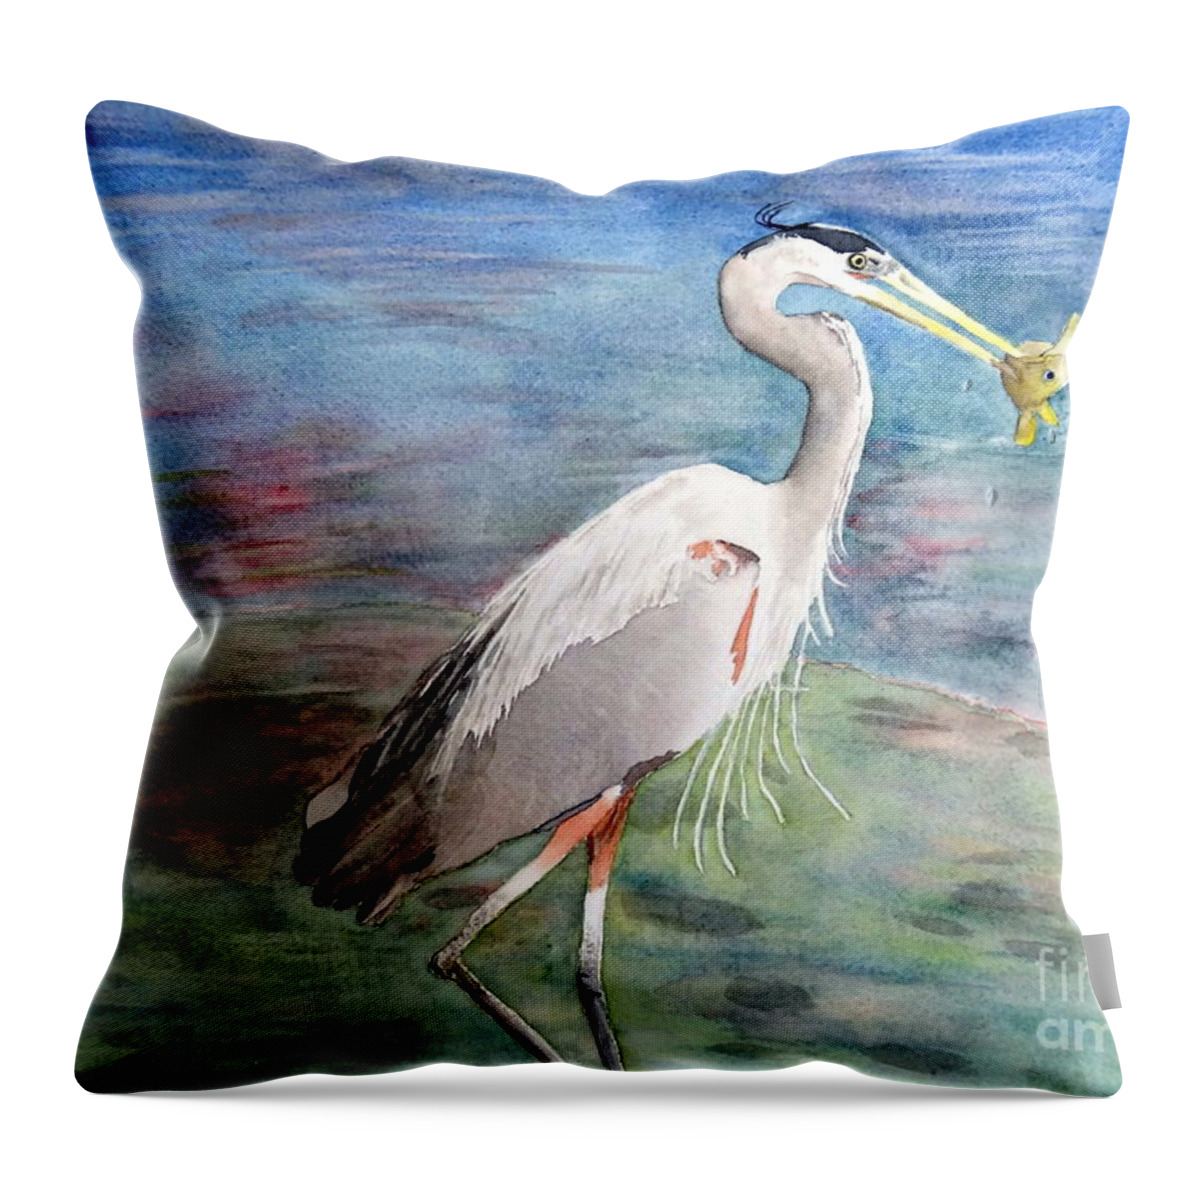 Great Throw Pillow featuring the painting Lunchtime Watercolour by Laurel Best